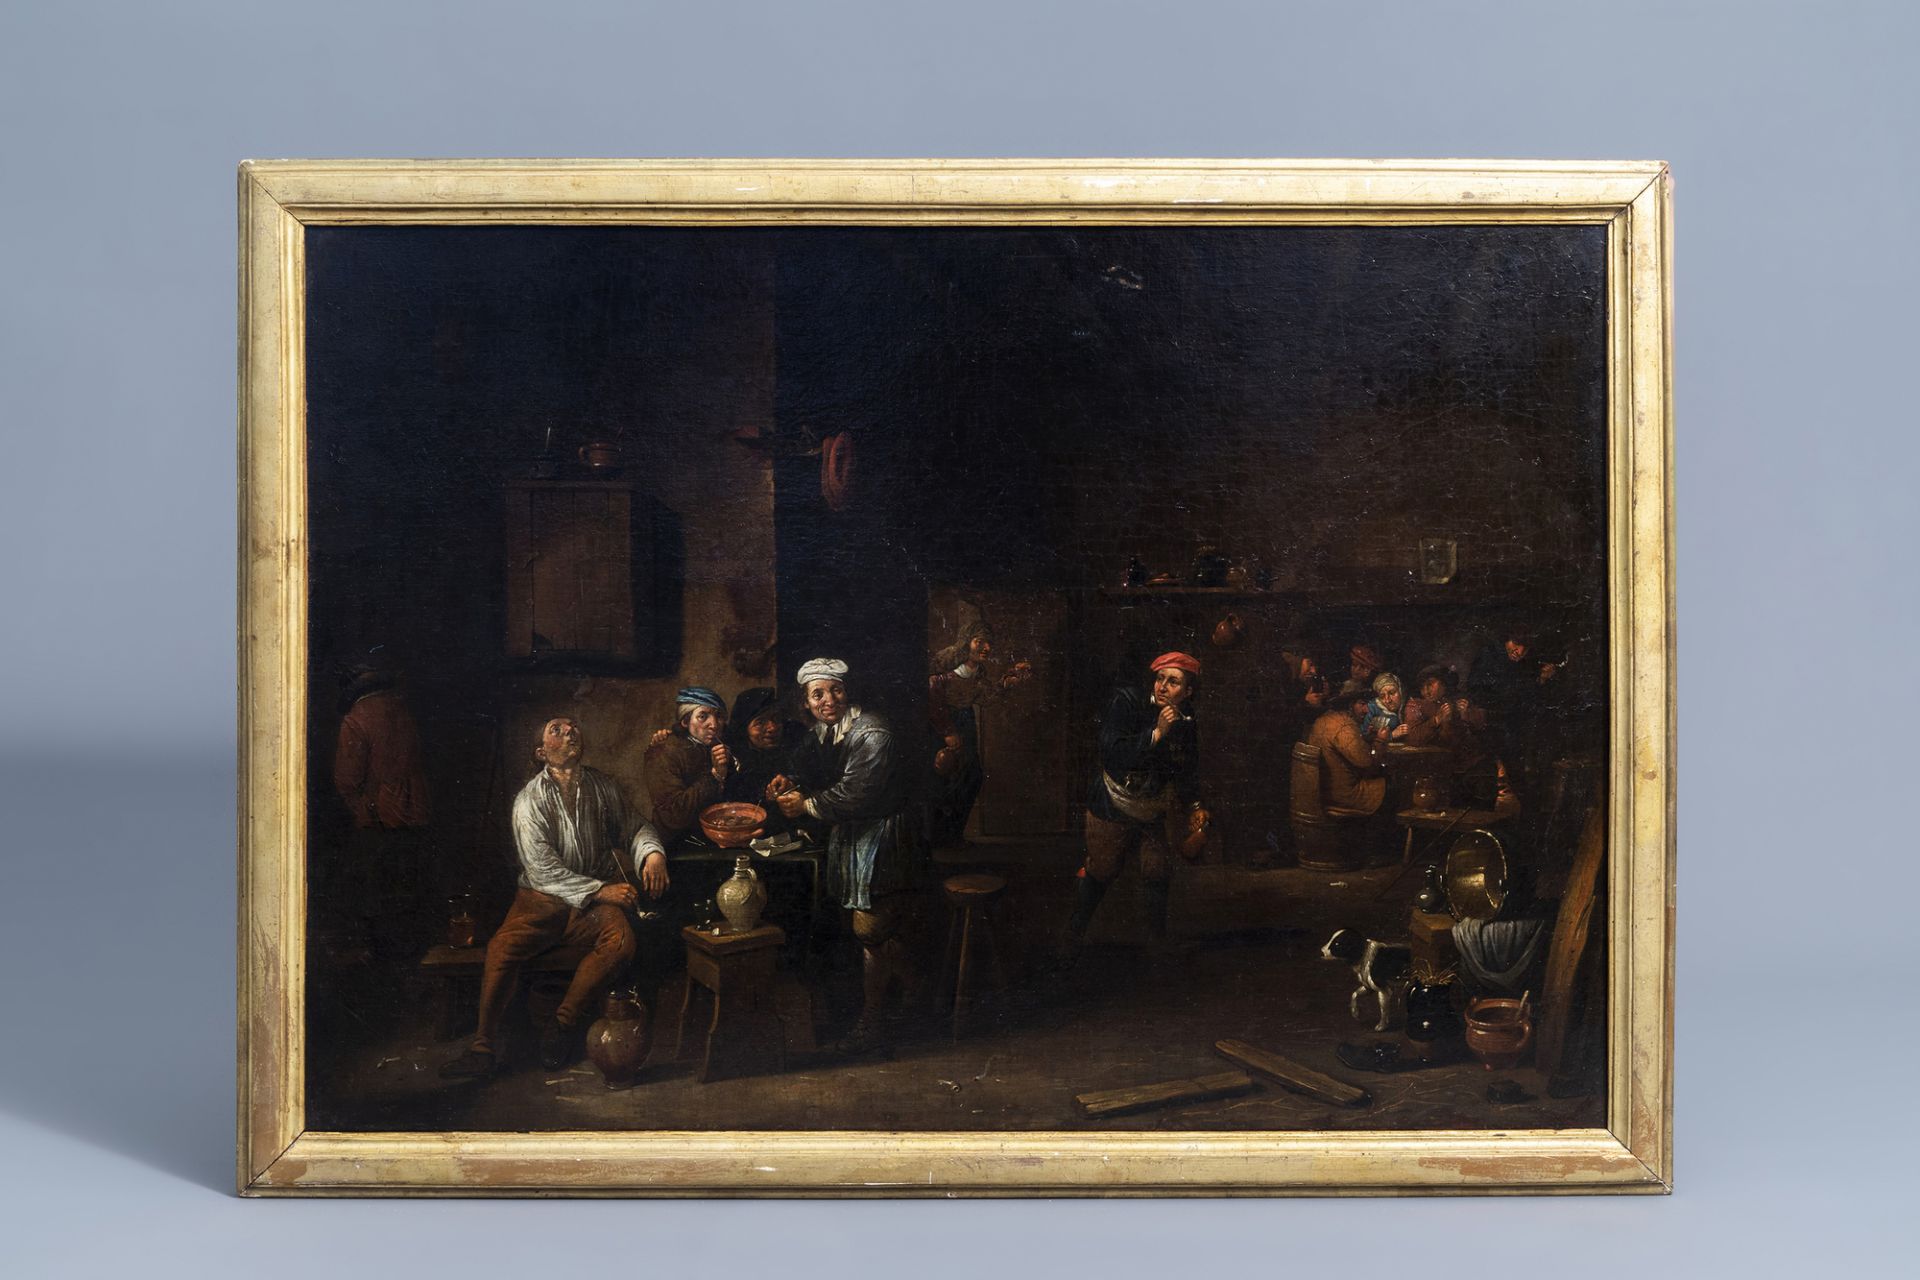 Victor Mahu (1647-1700): Peasants making merry at an inn, oil on canvas - Image 2 of 6